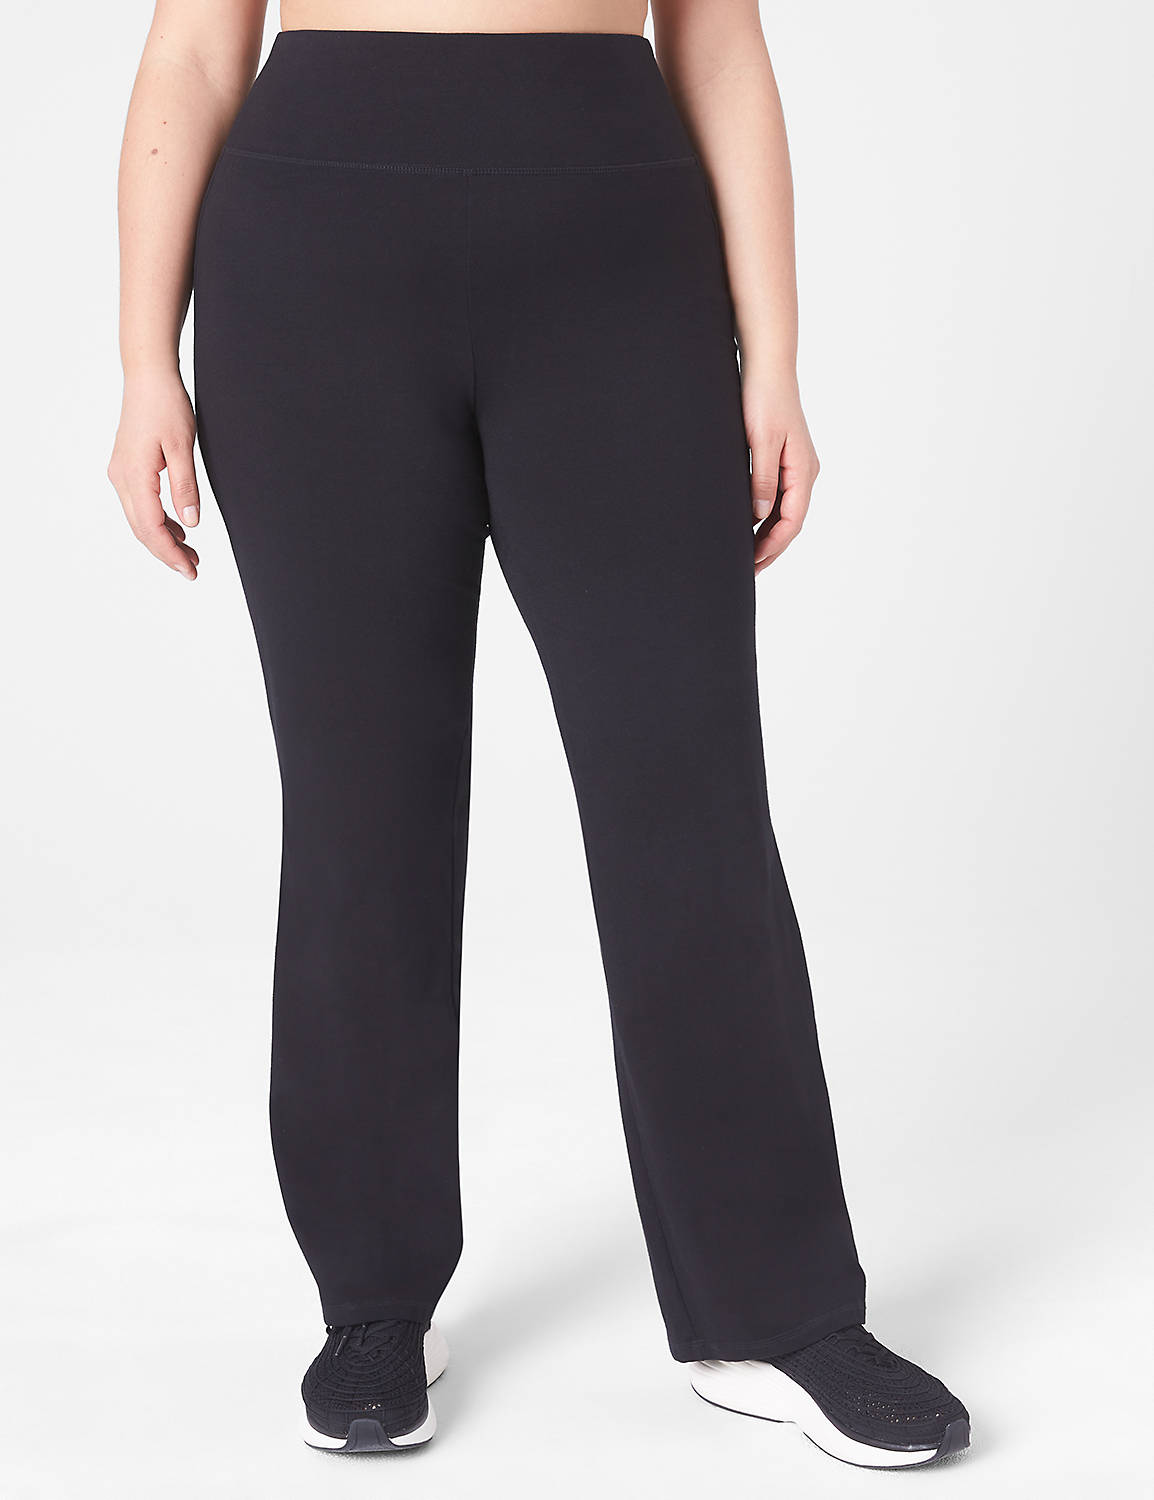 Signature Stretch Bootcut Pant Product Image 1